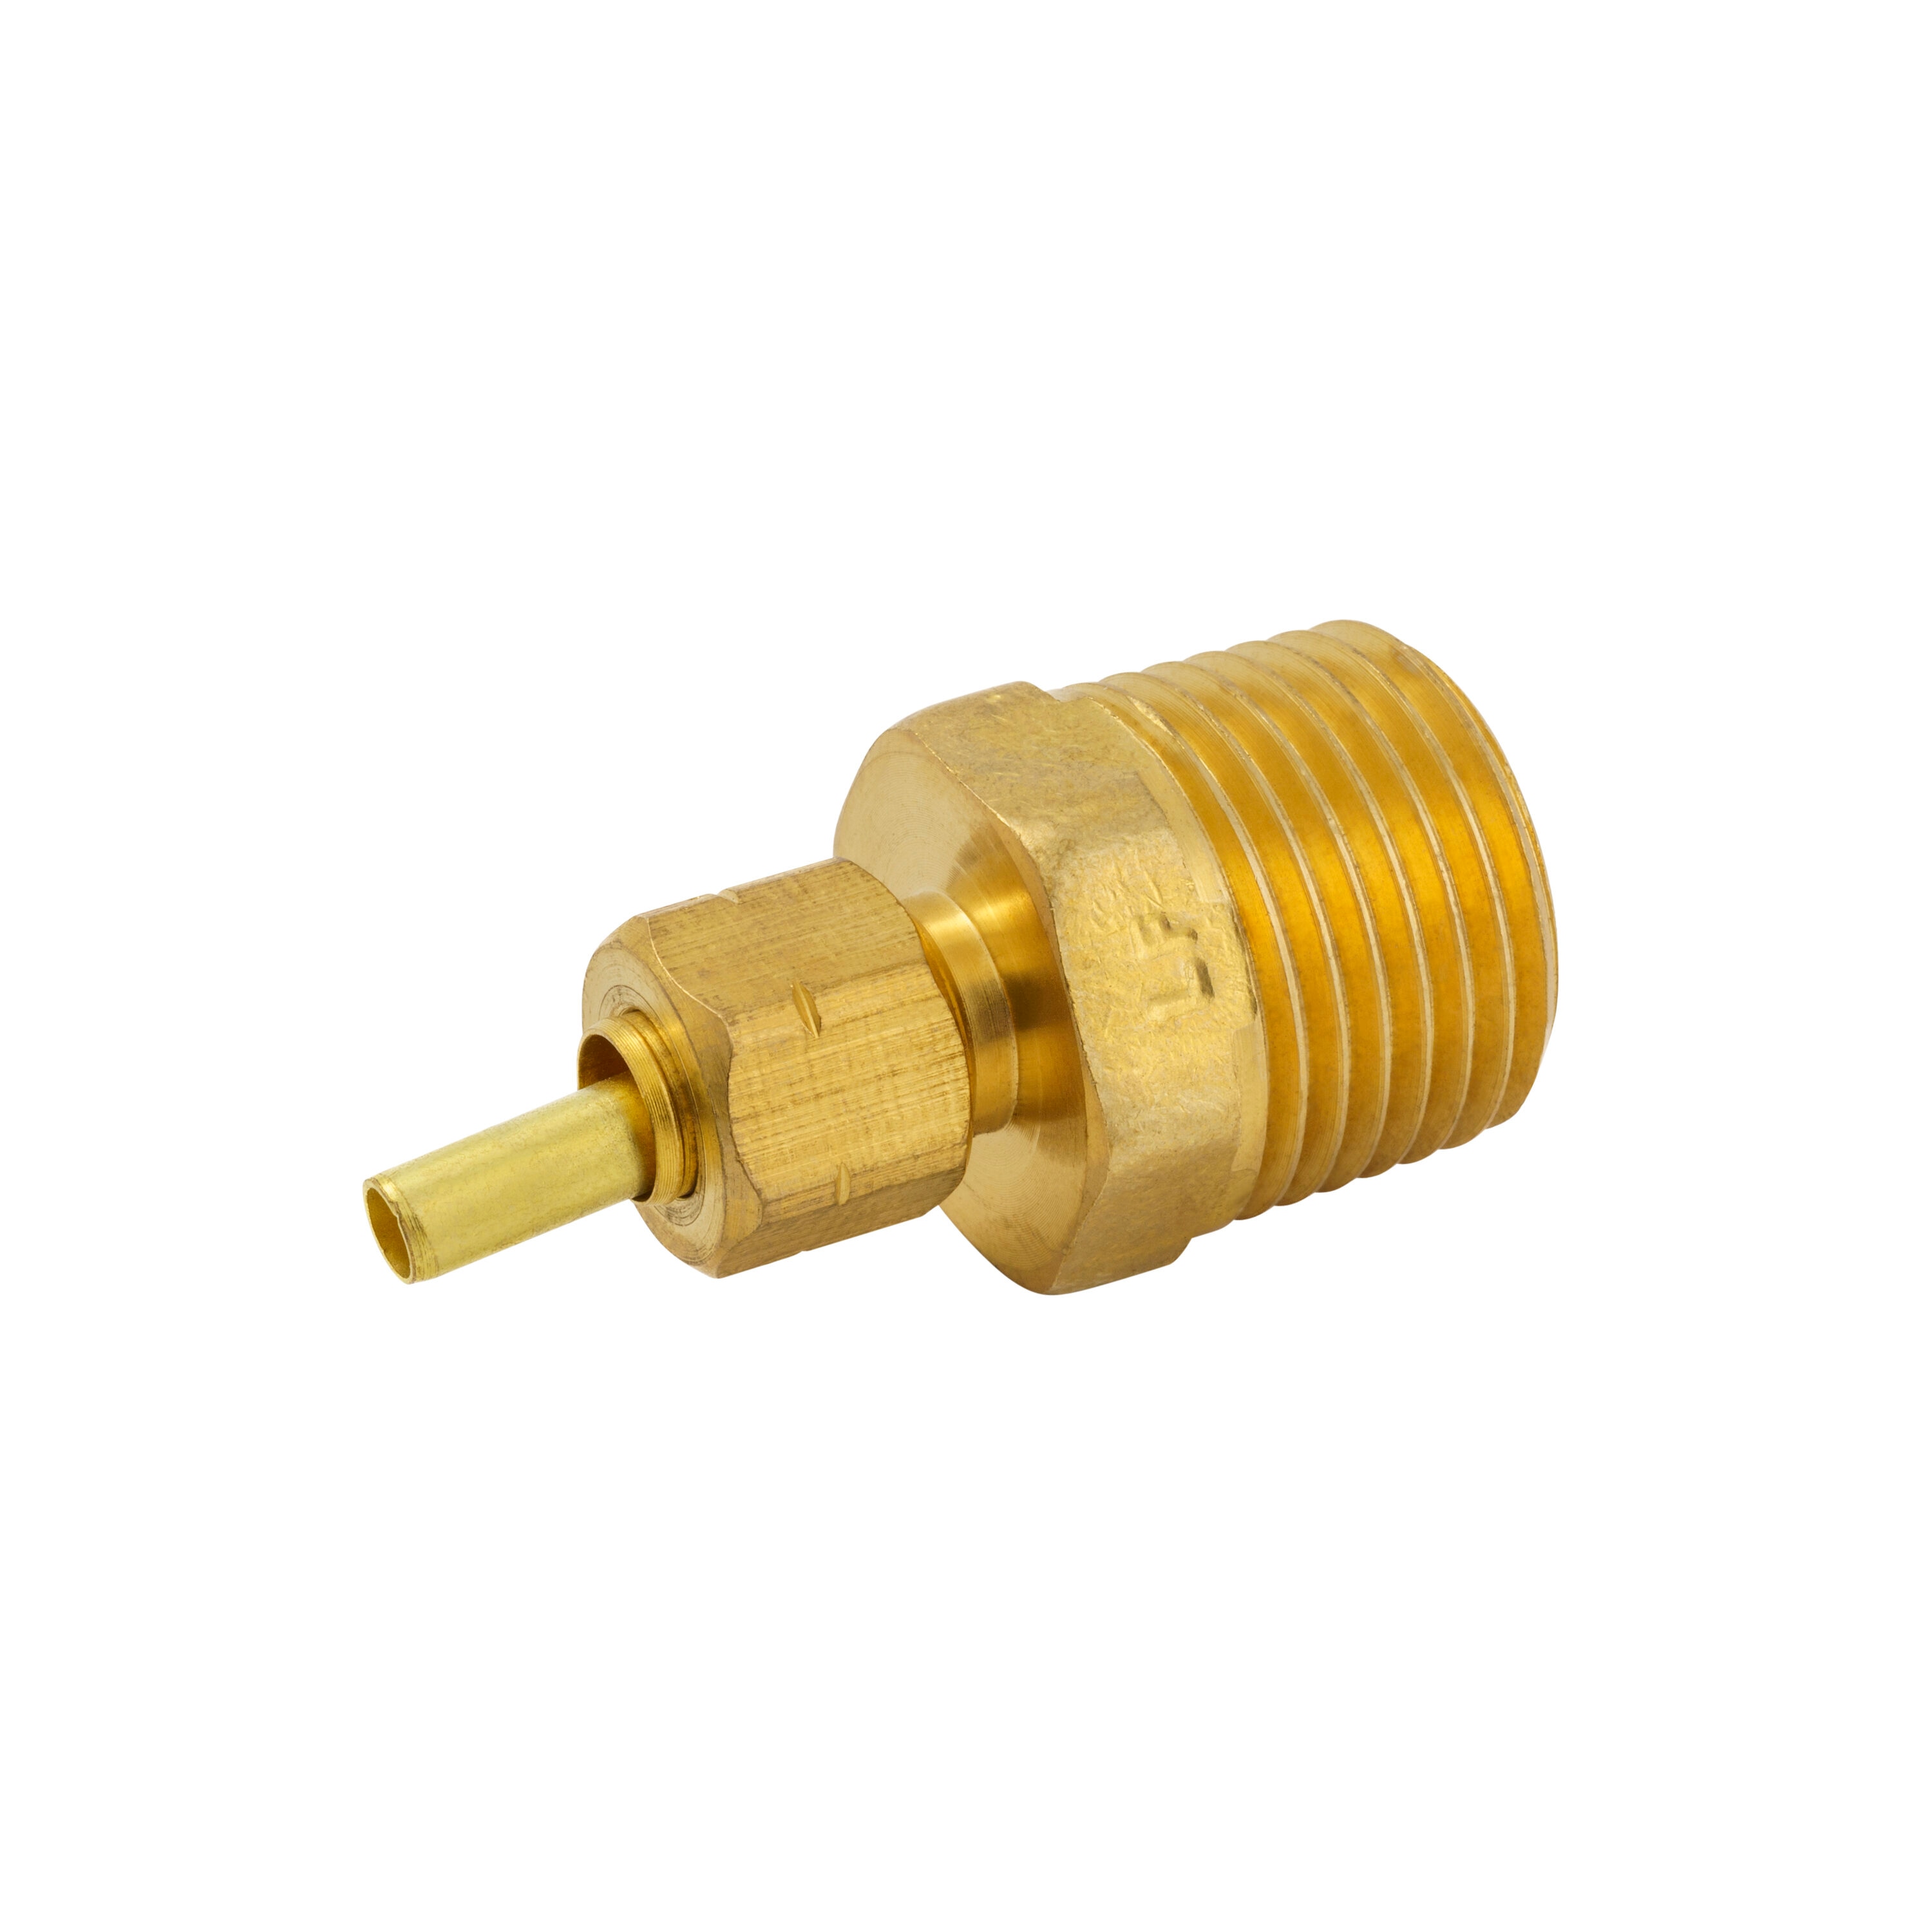 Pump screw connection sets with female threads - flat sealing, up